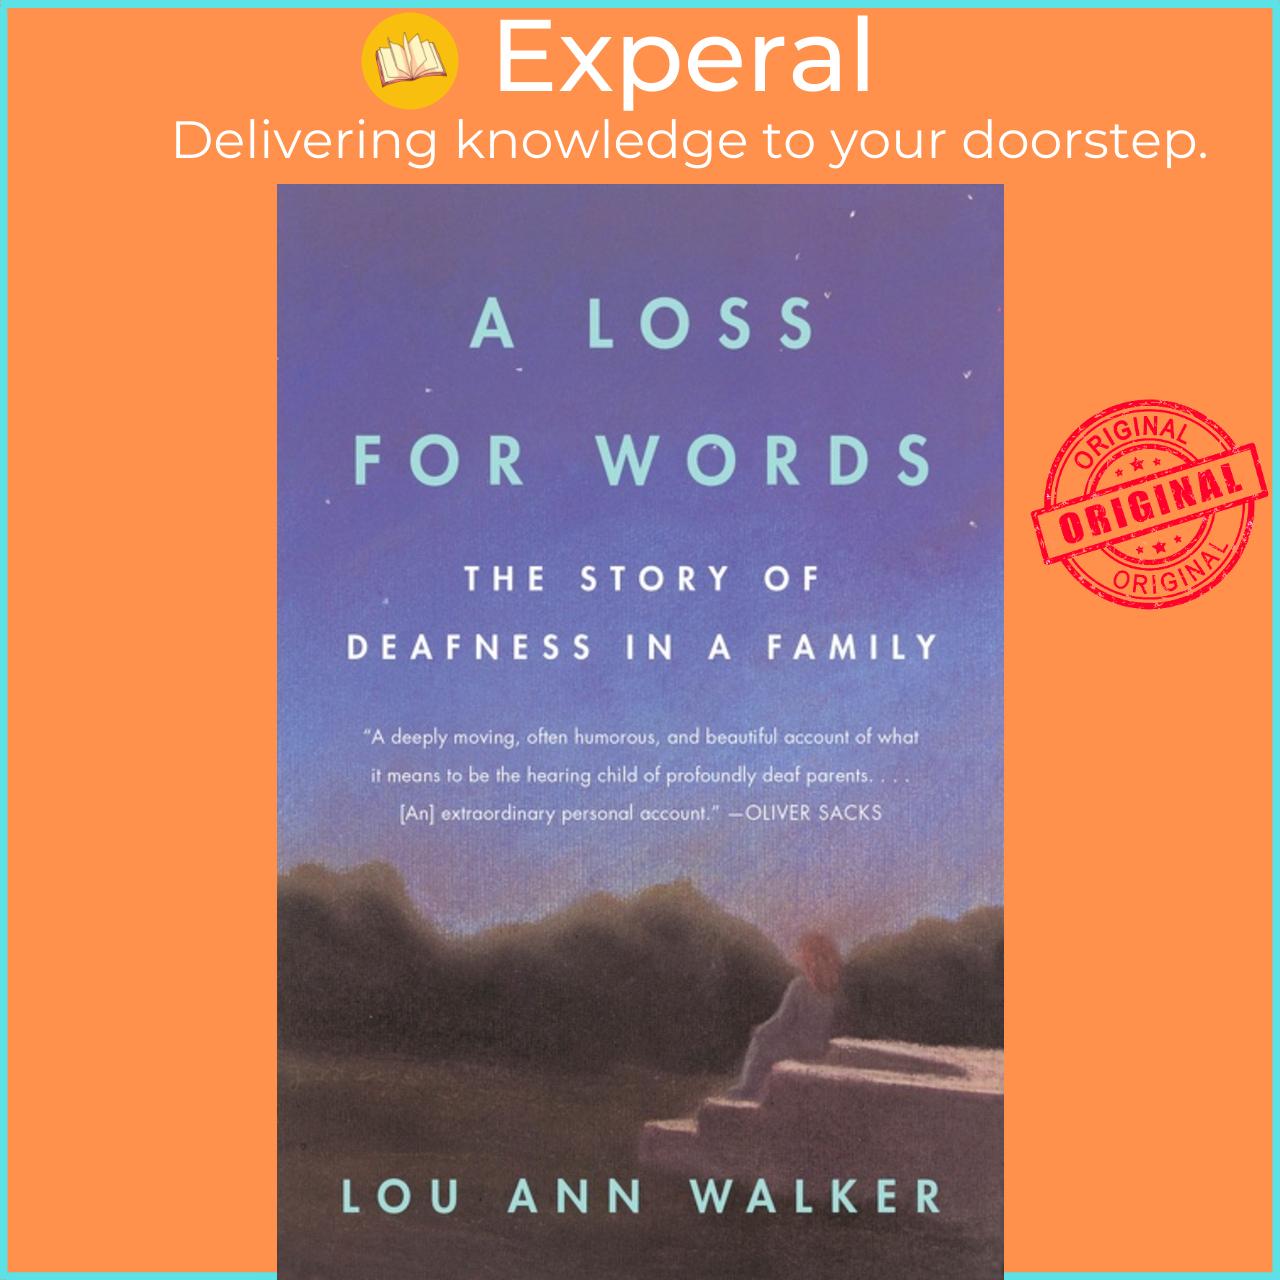 Sách - A Loss for Words - The Story of Deafness in a Family by Lou Ann Walker (paperback)